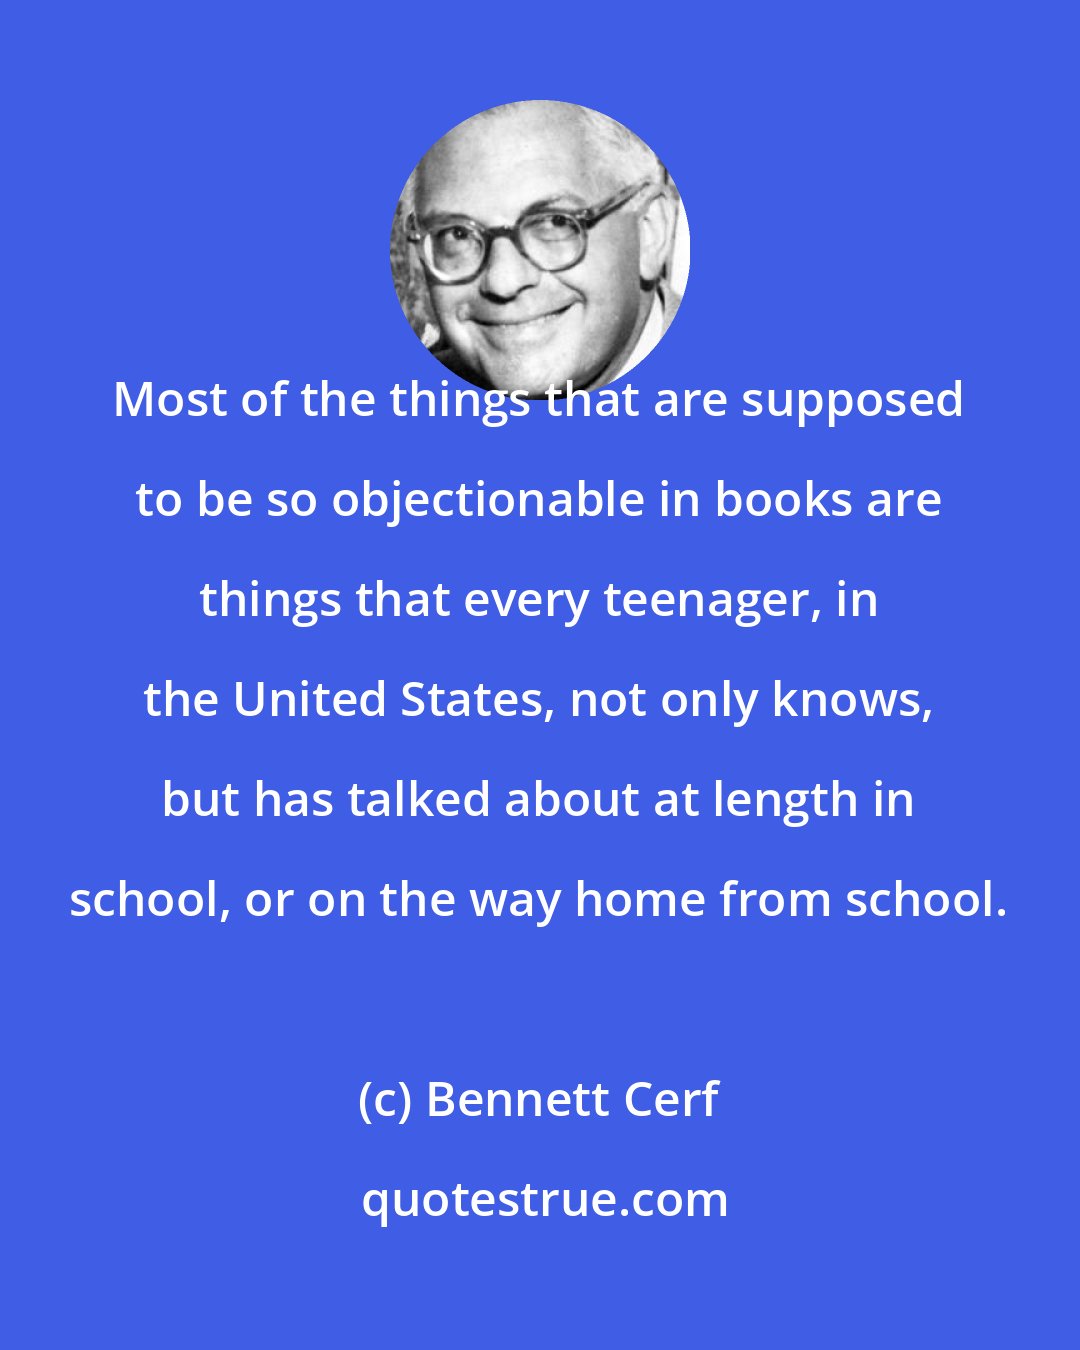 Bennett Cerf: Most of the things that are supposed to be so objectionable in books are things that every teenager, in the United States, not only knows, but has talked about at length in school, or on the way home from school.